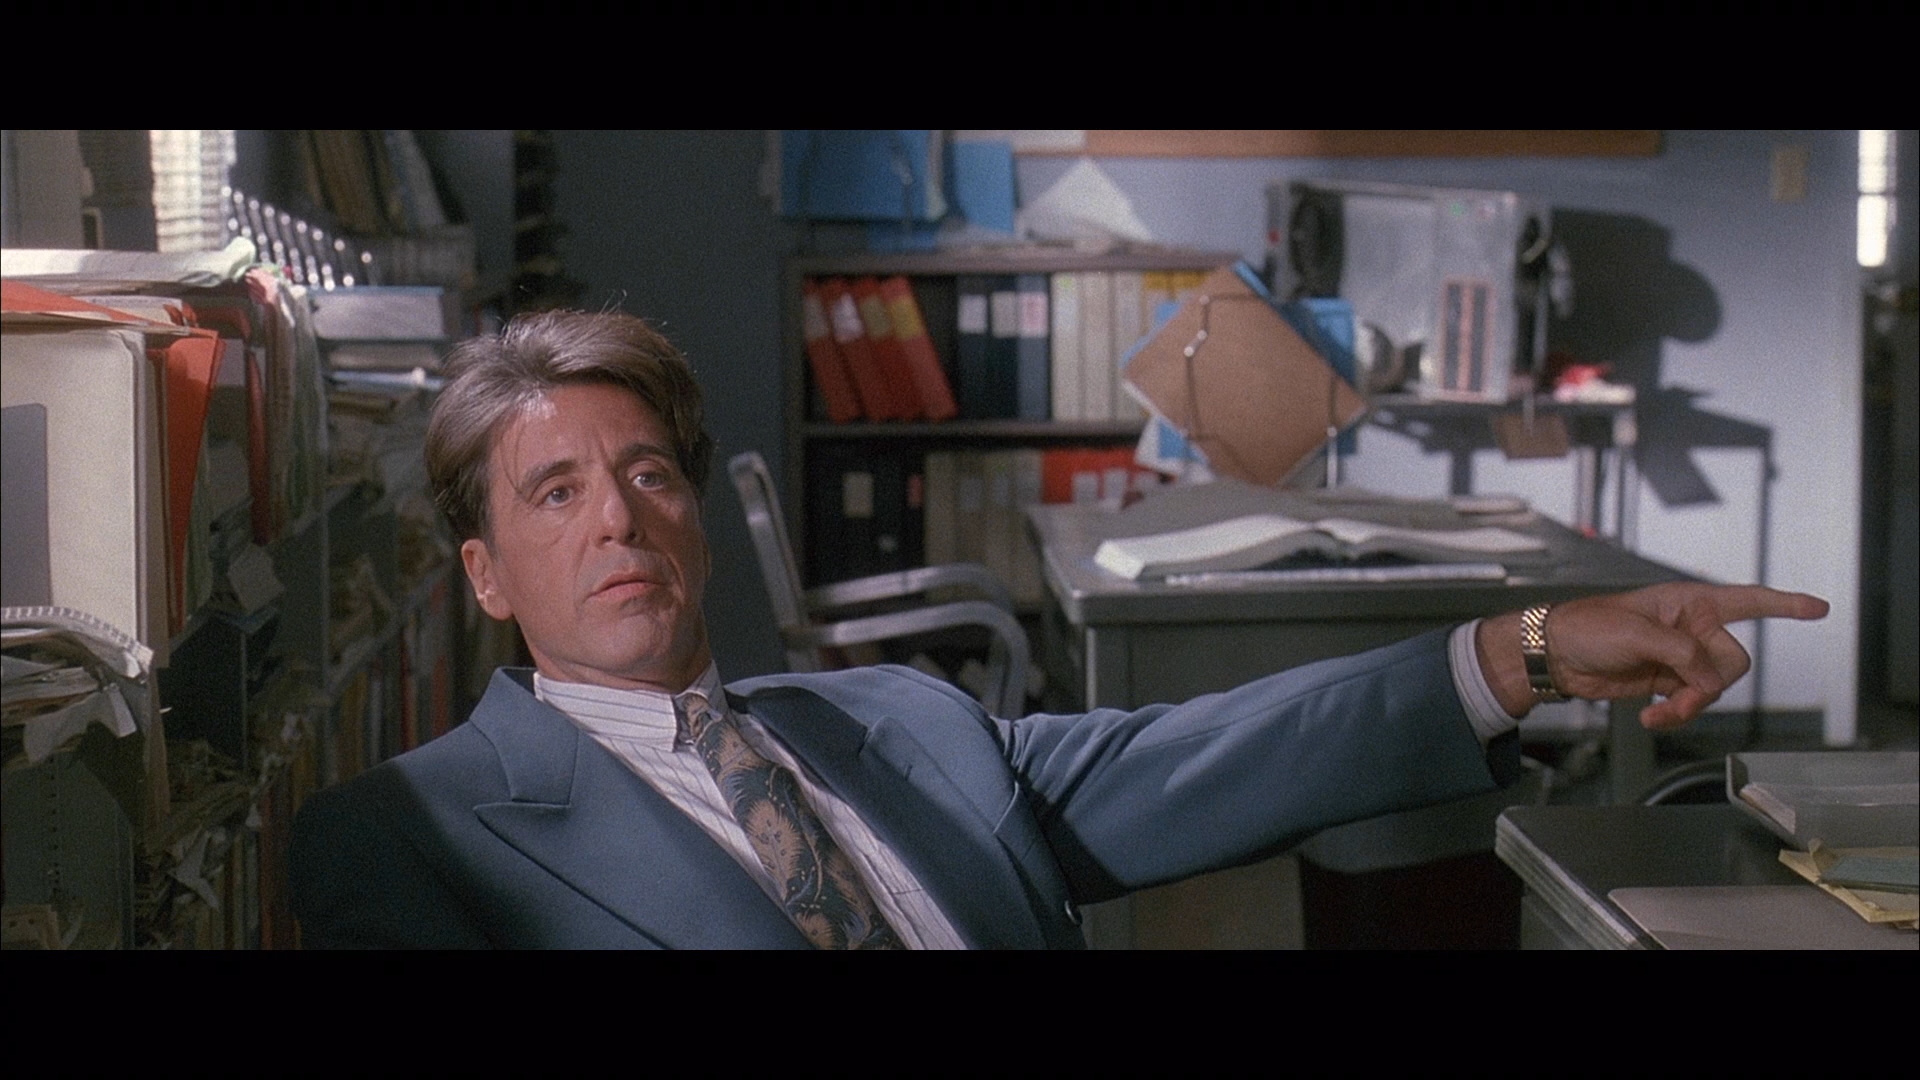 Glengarry glen ross bluray clearance up to 70.